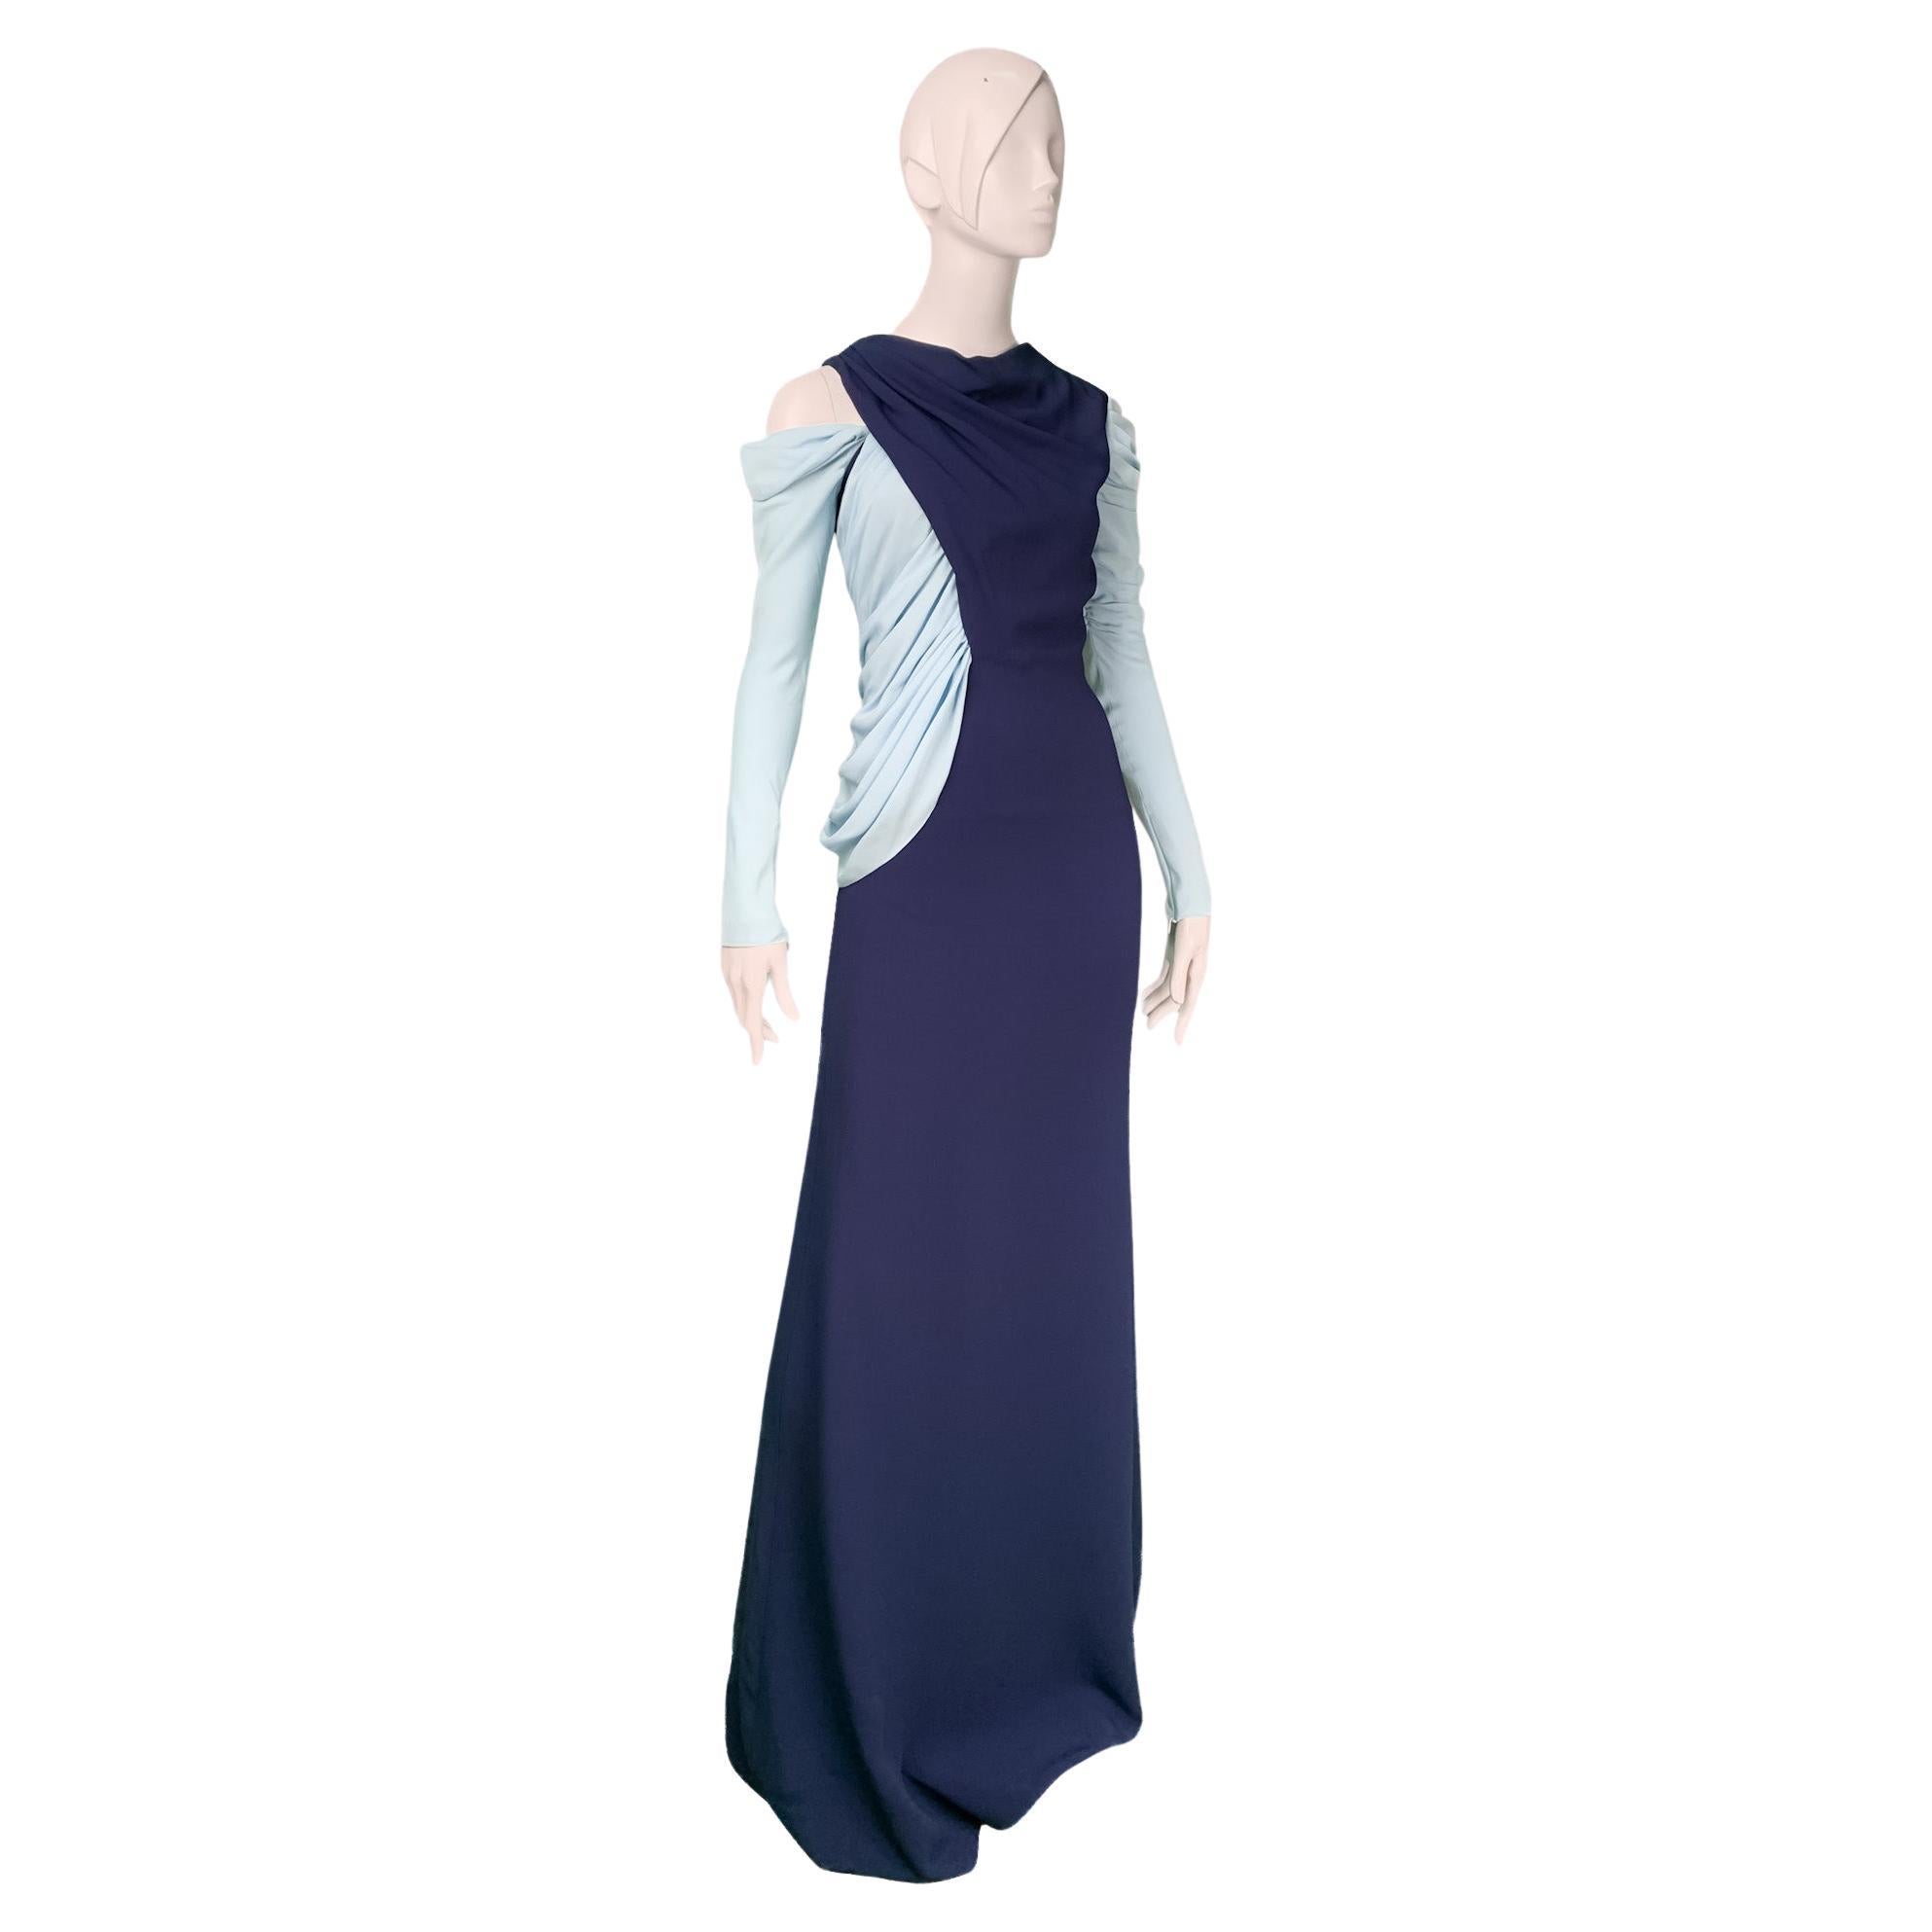 From Maison Vionnet Paris, a silk floor-length asymmetrical evening gown with color block design in navy-blue and pastel blue. Impressive with its dramatic draperies and expert tailoring, very reminiscent of the early days of Madeline Vionnet's